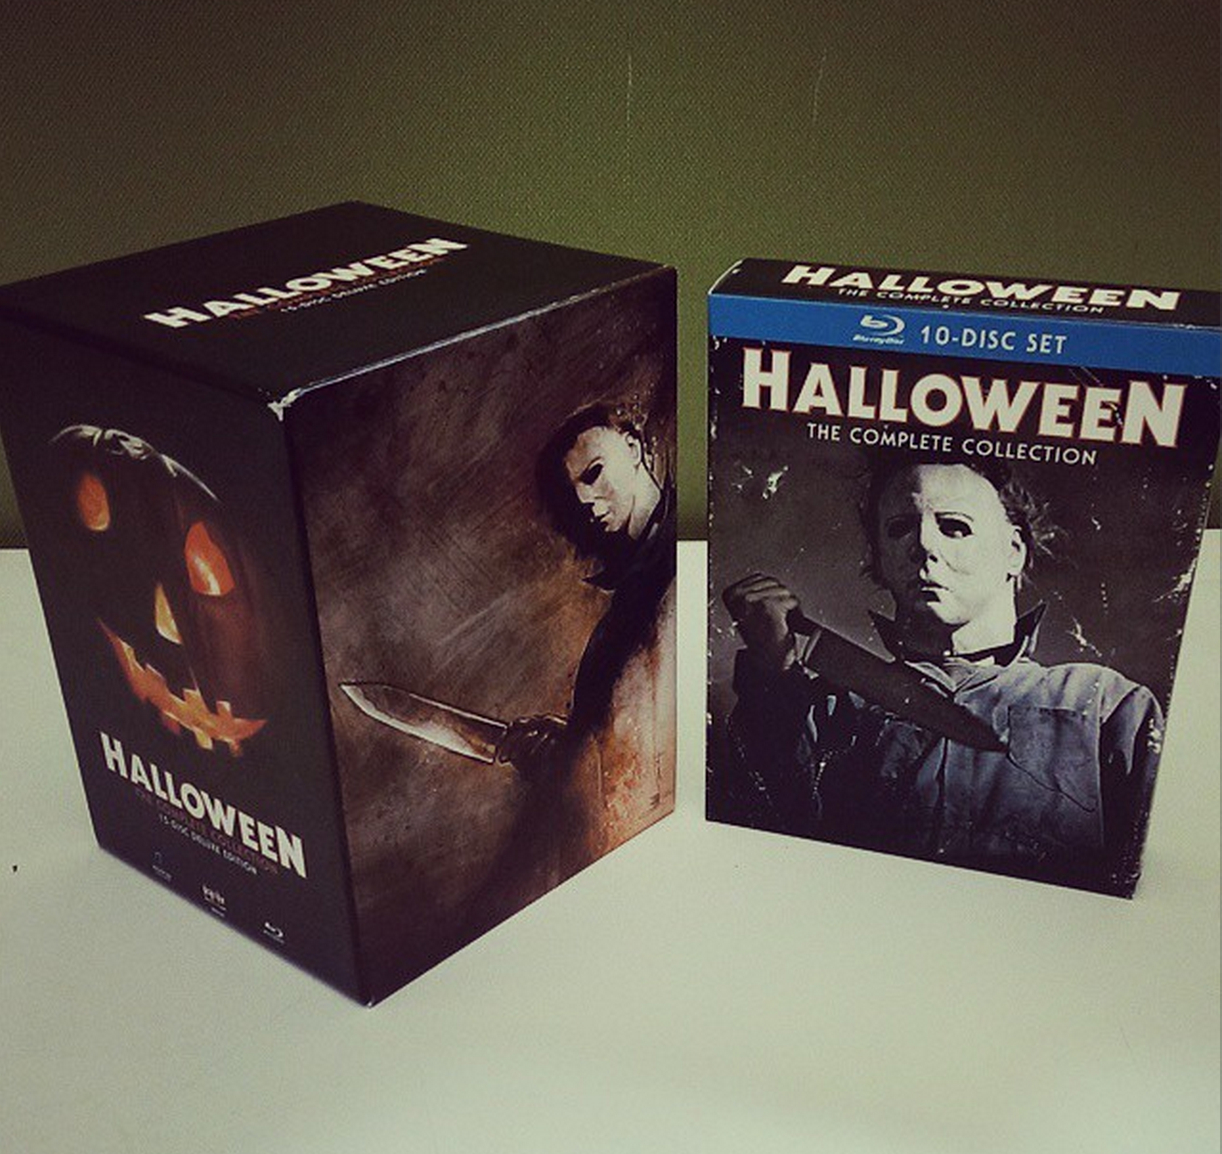 HALLOWEEN The Complete Collection now available on Bluray HiDef